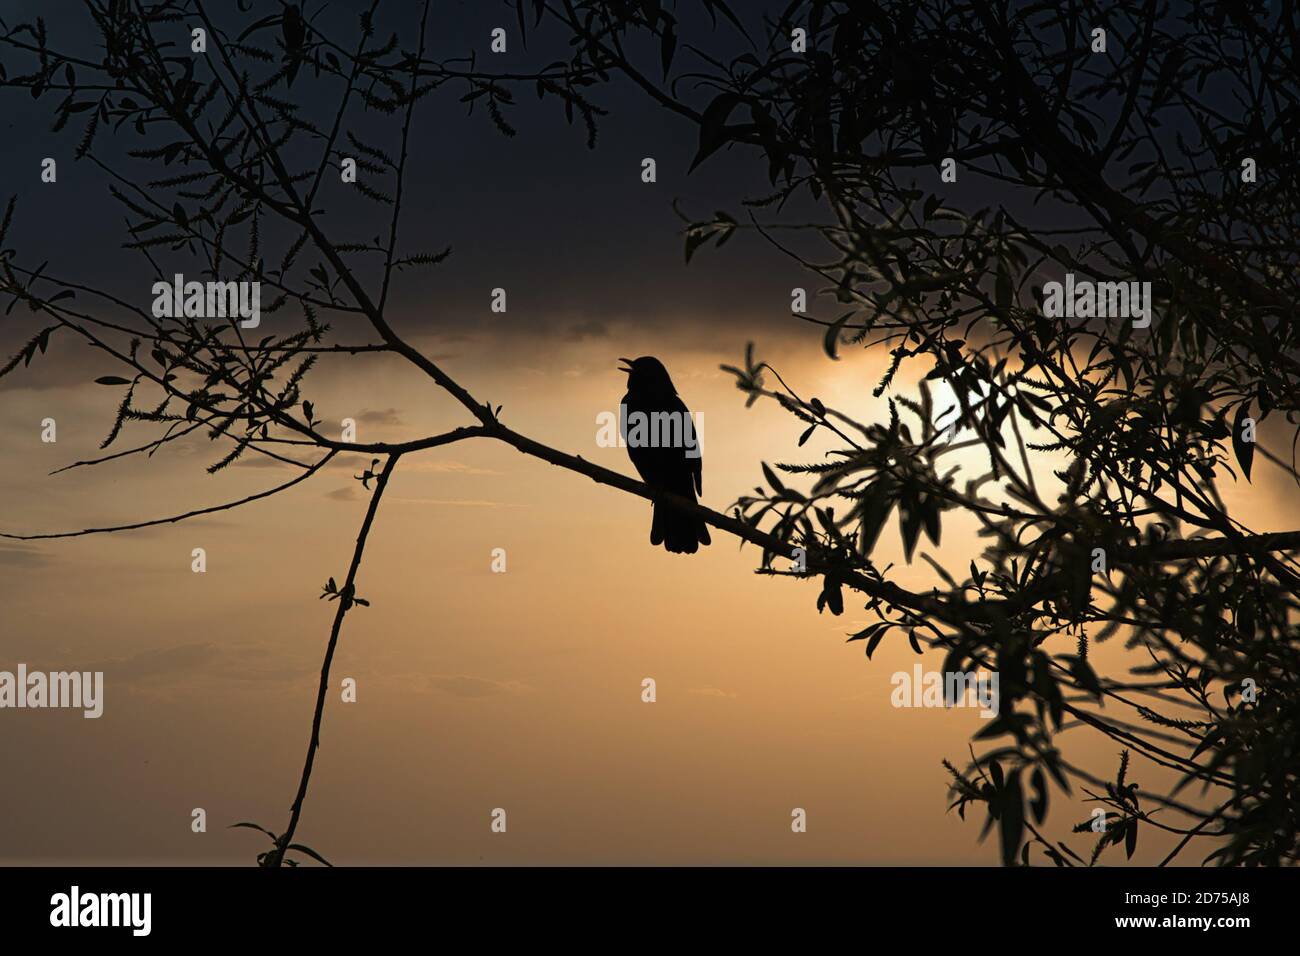 Silhouette of a singing bird with a lovely orange sky backdrop Stock Photo